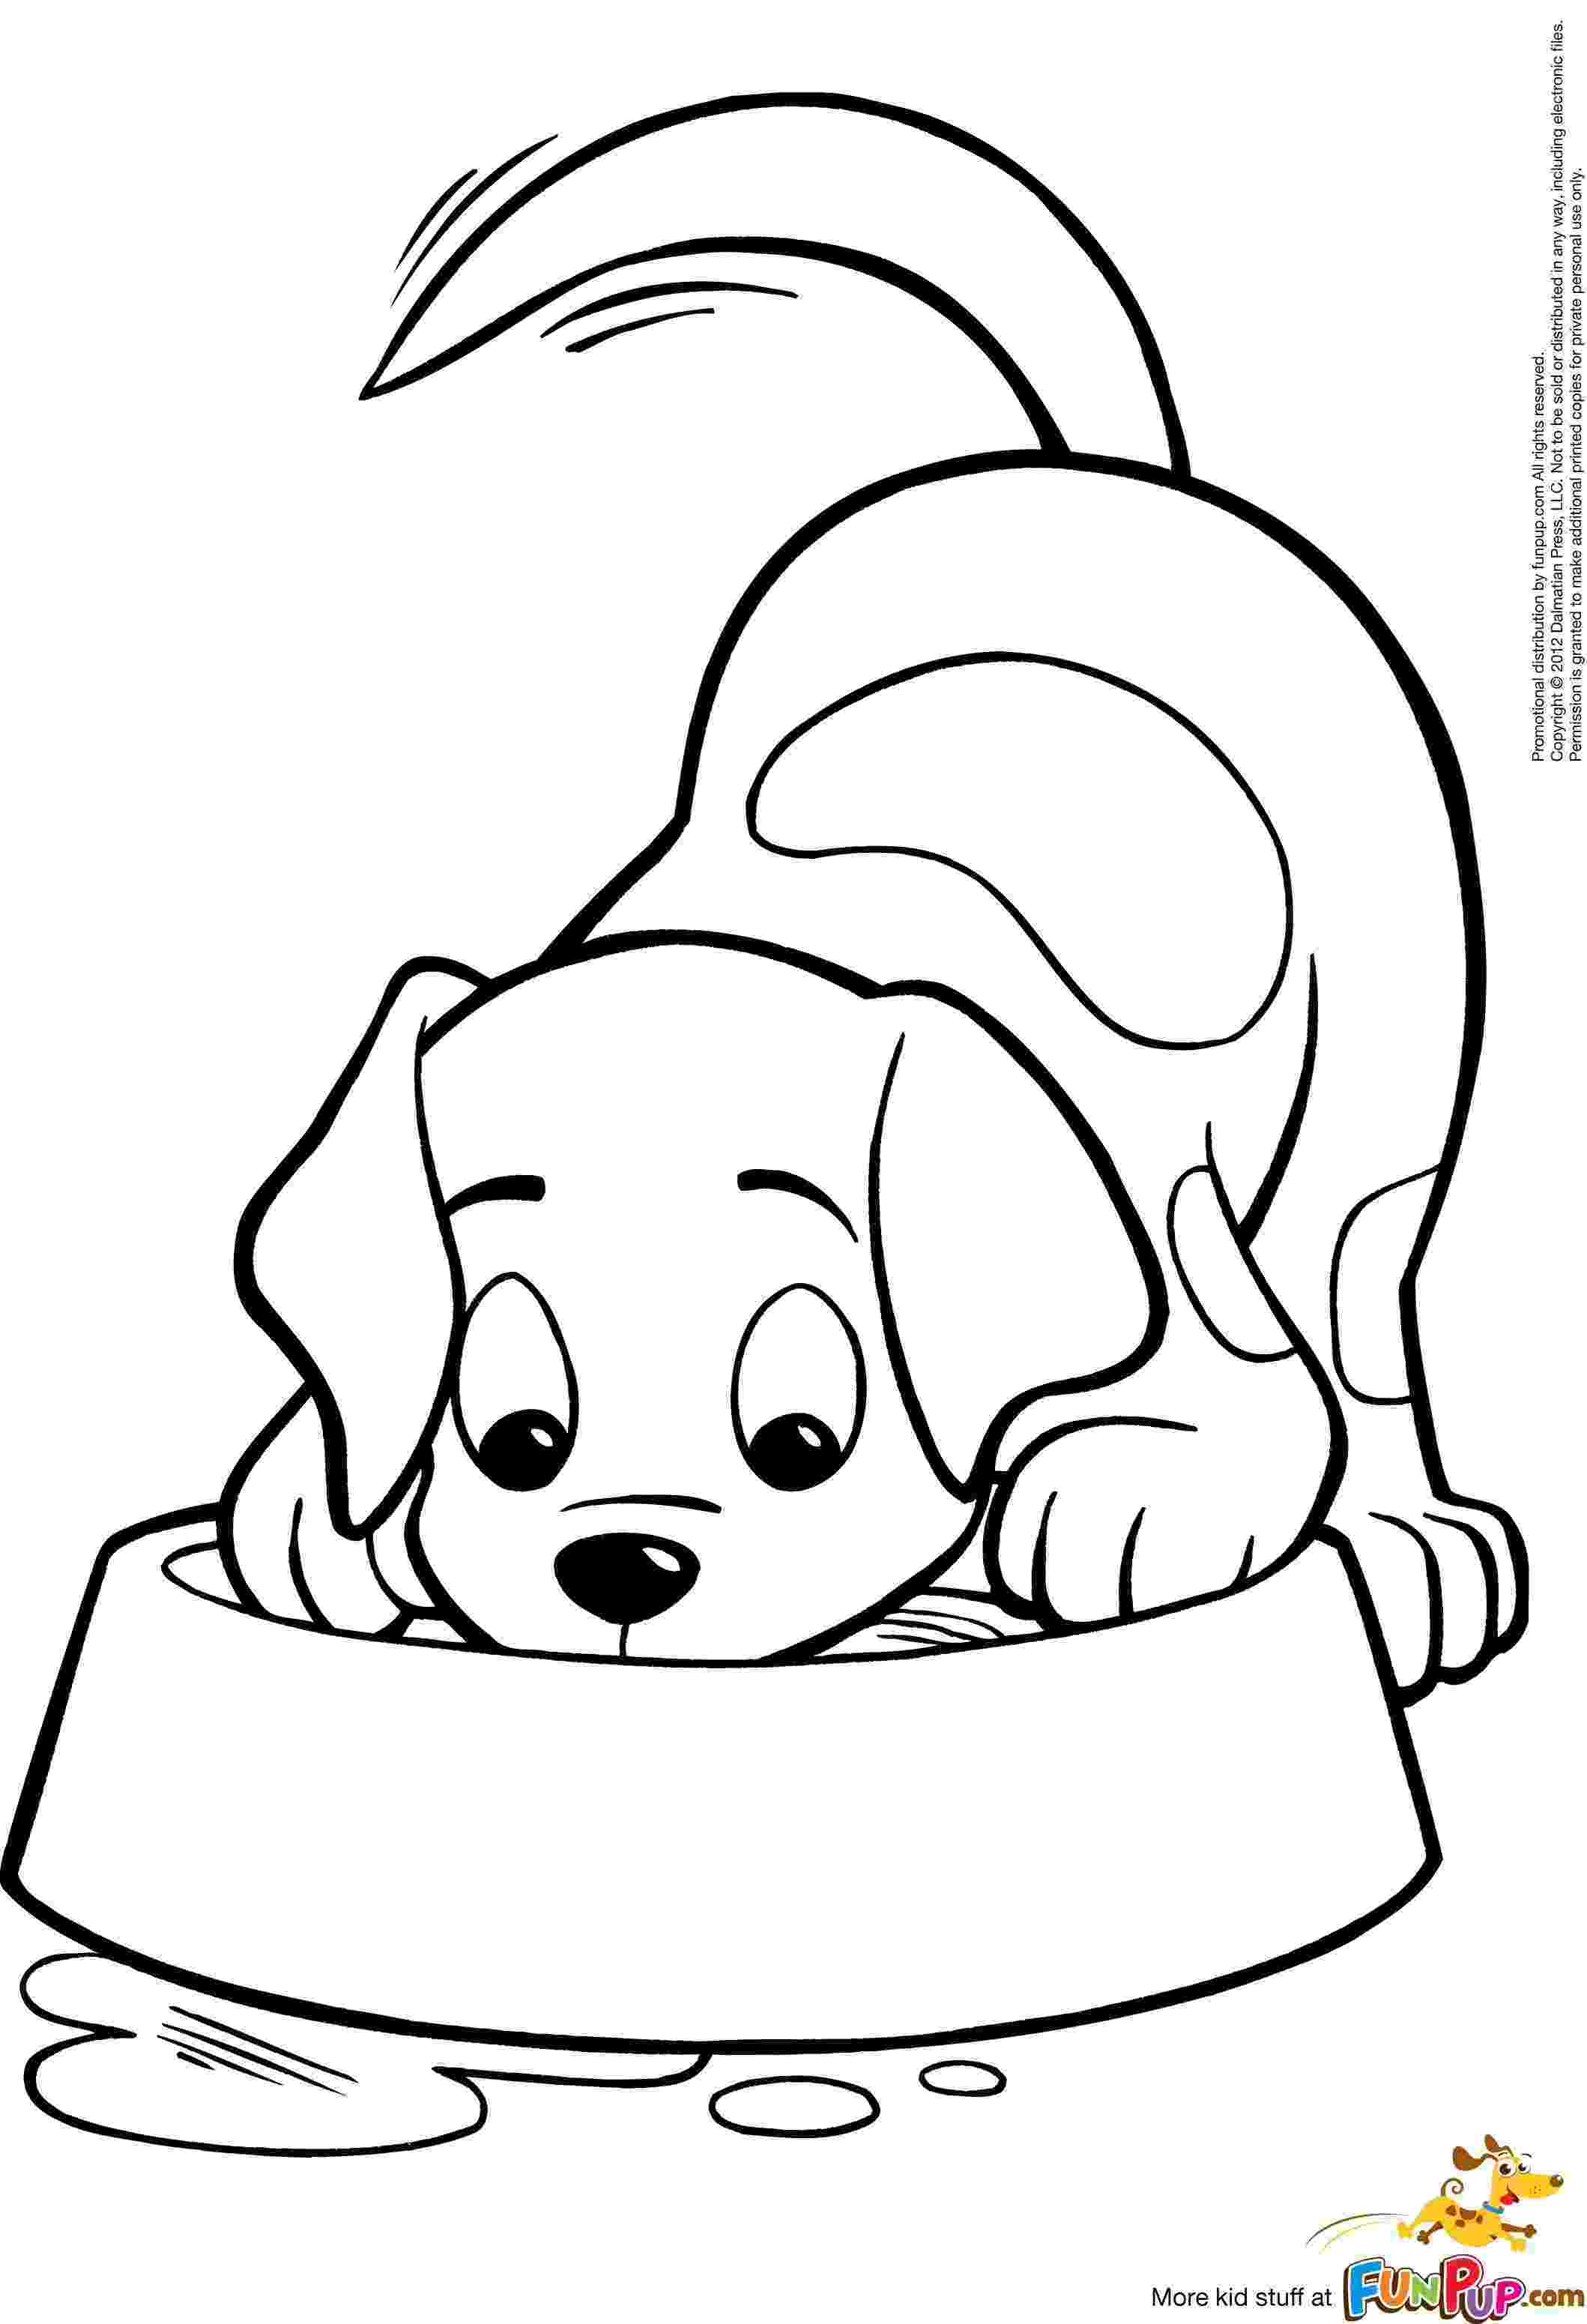 dog colouring pages dog colouring pages dog colouring pages 